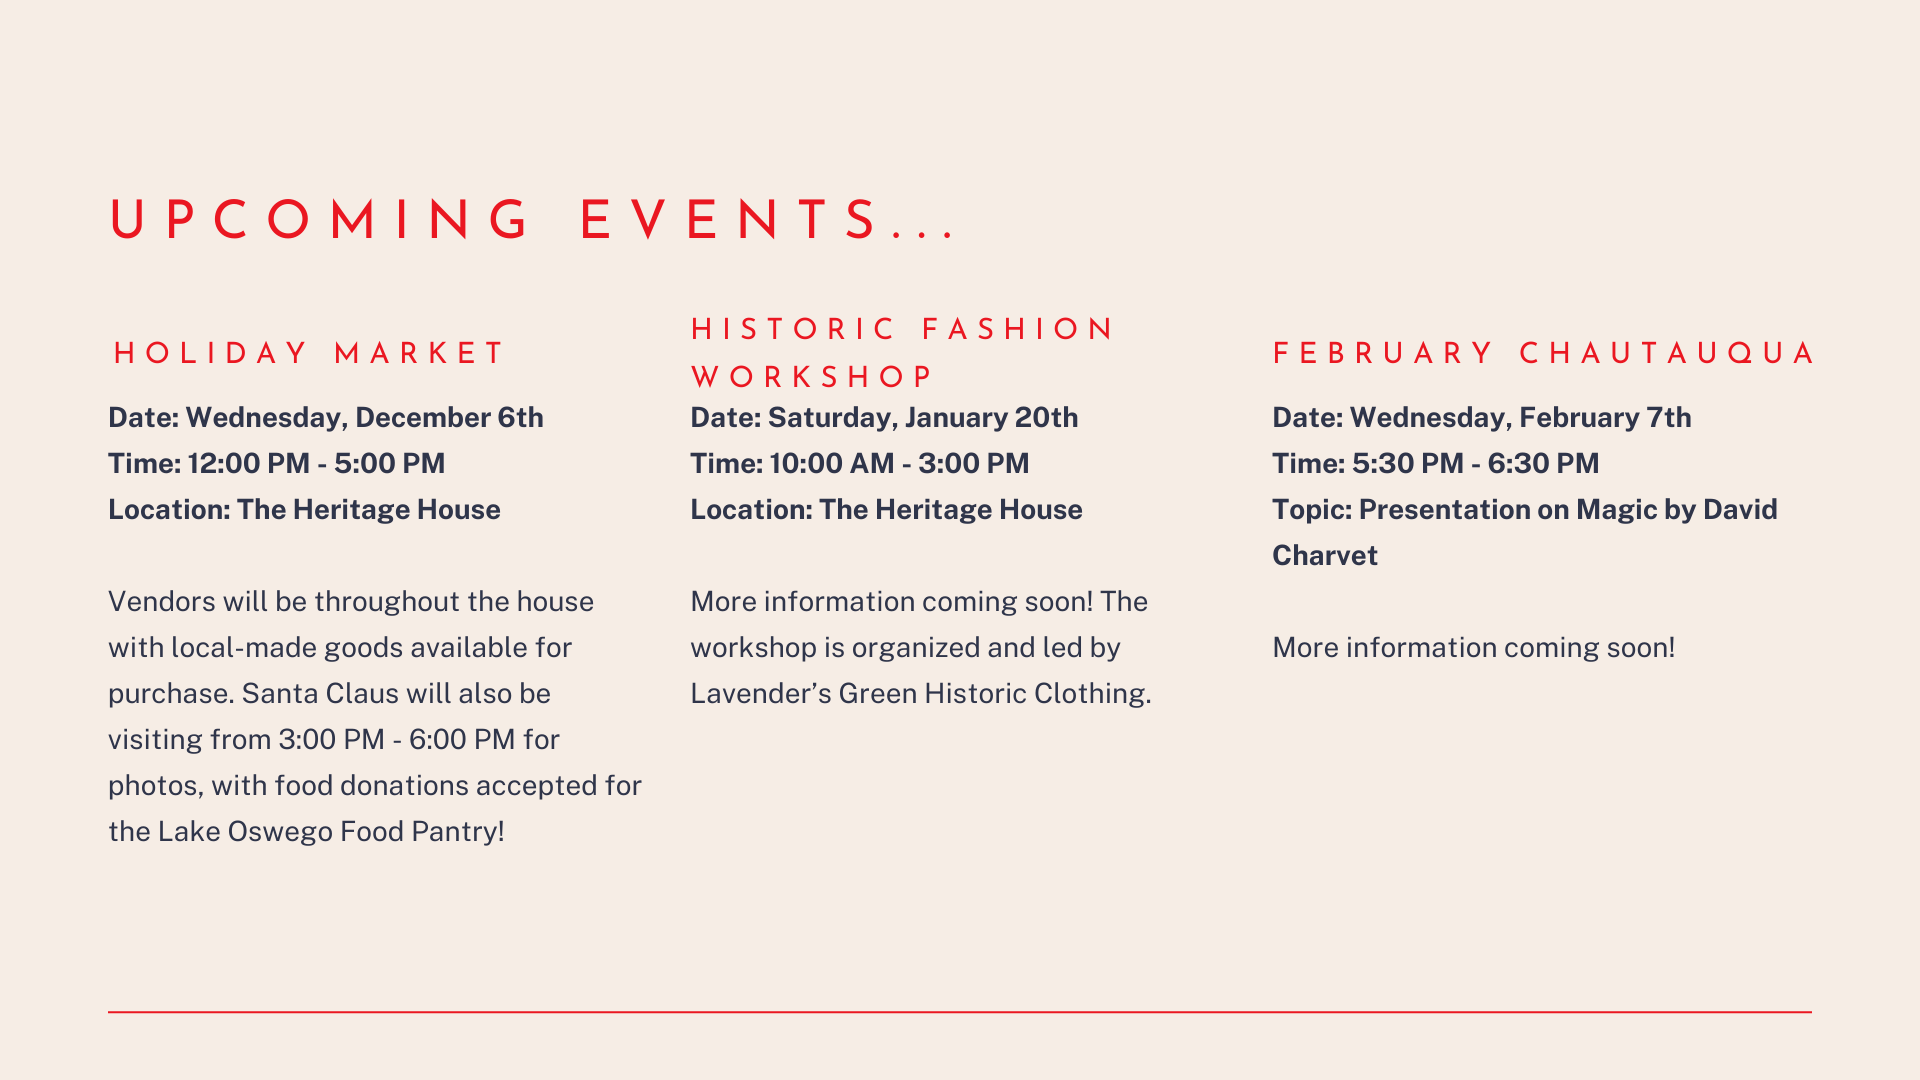 Upcoming events include the holiday market, historical fashion workshop, and February Chautauqua